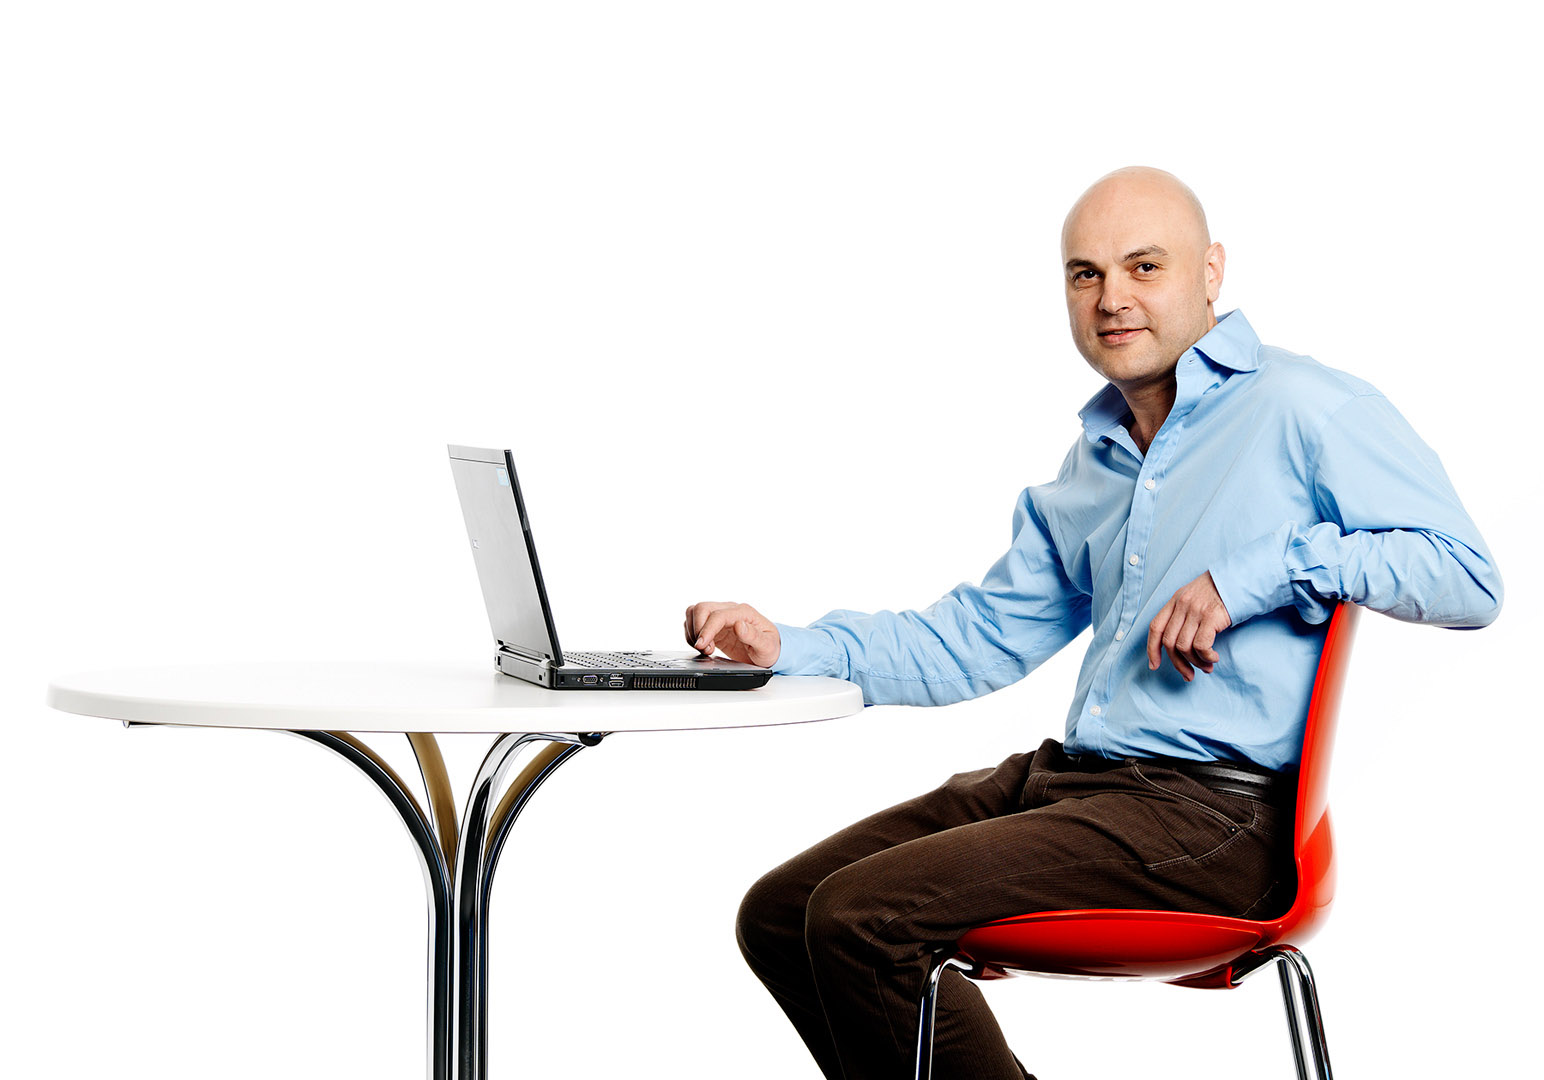 Cutout portrait of man with red chair round table and laptop